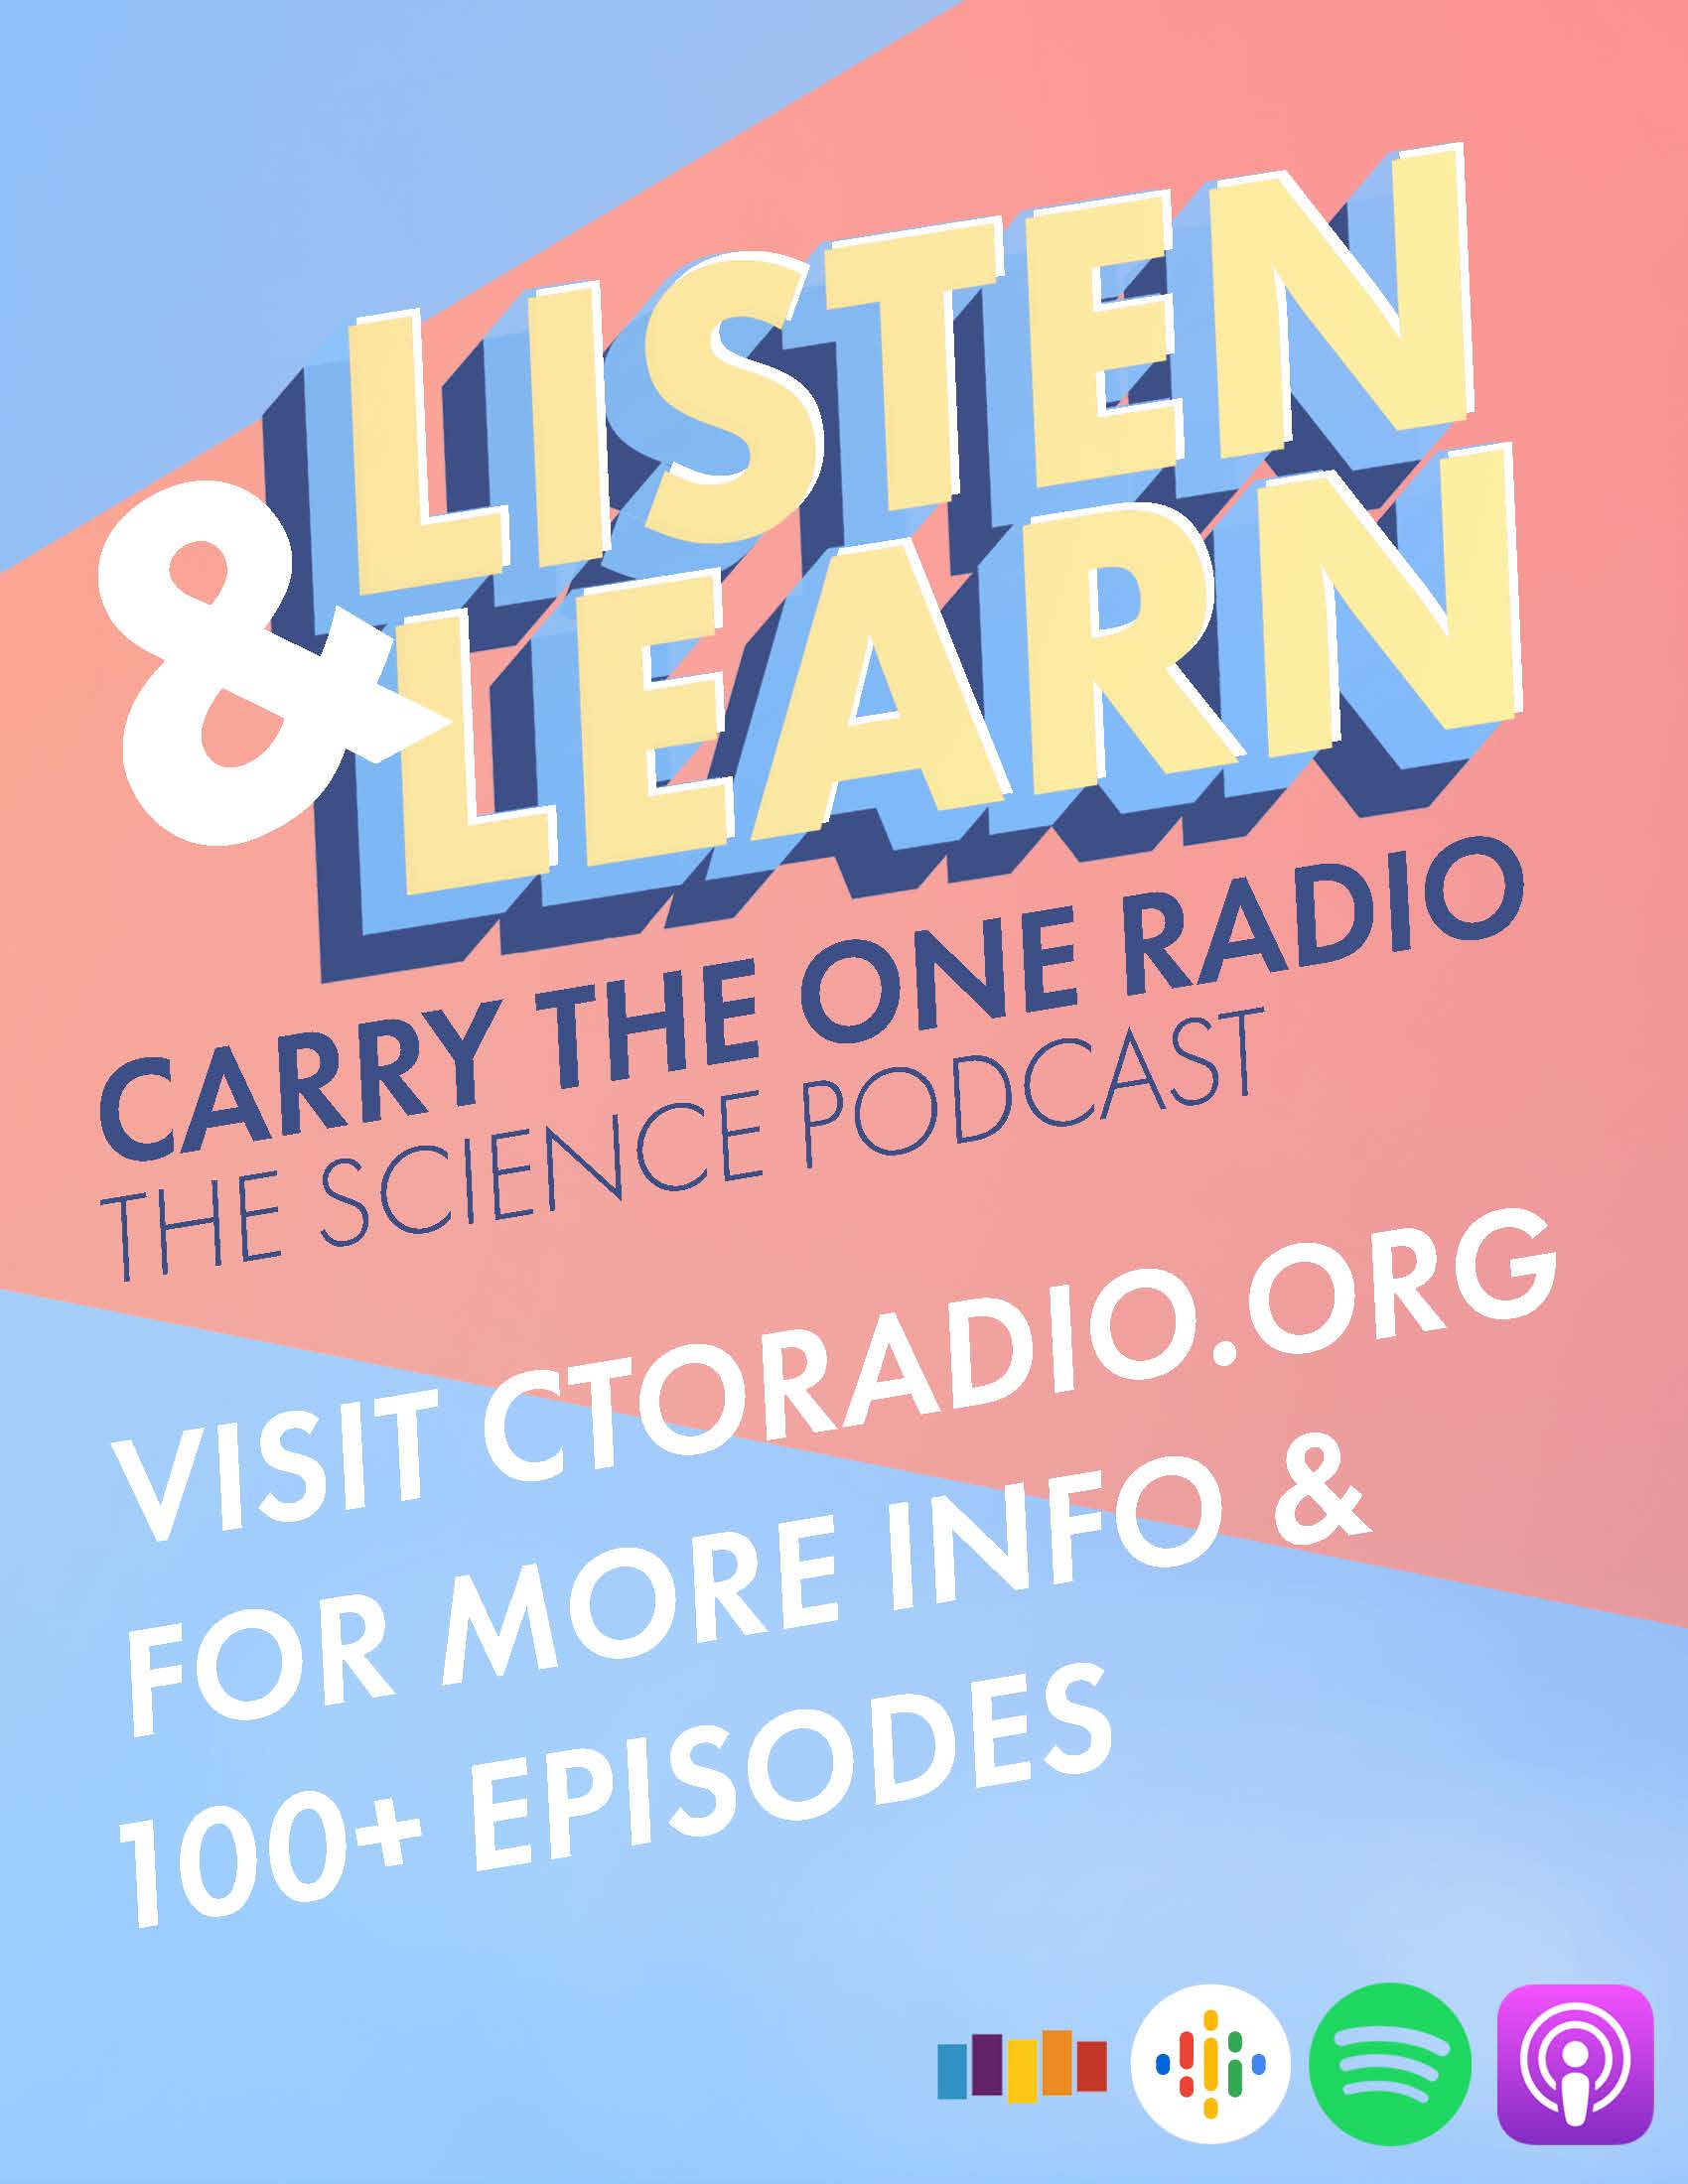 carry the one, podcast, radio, science